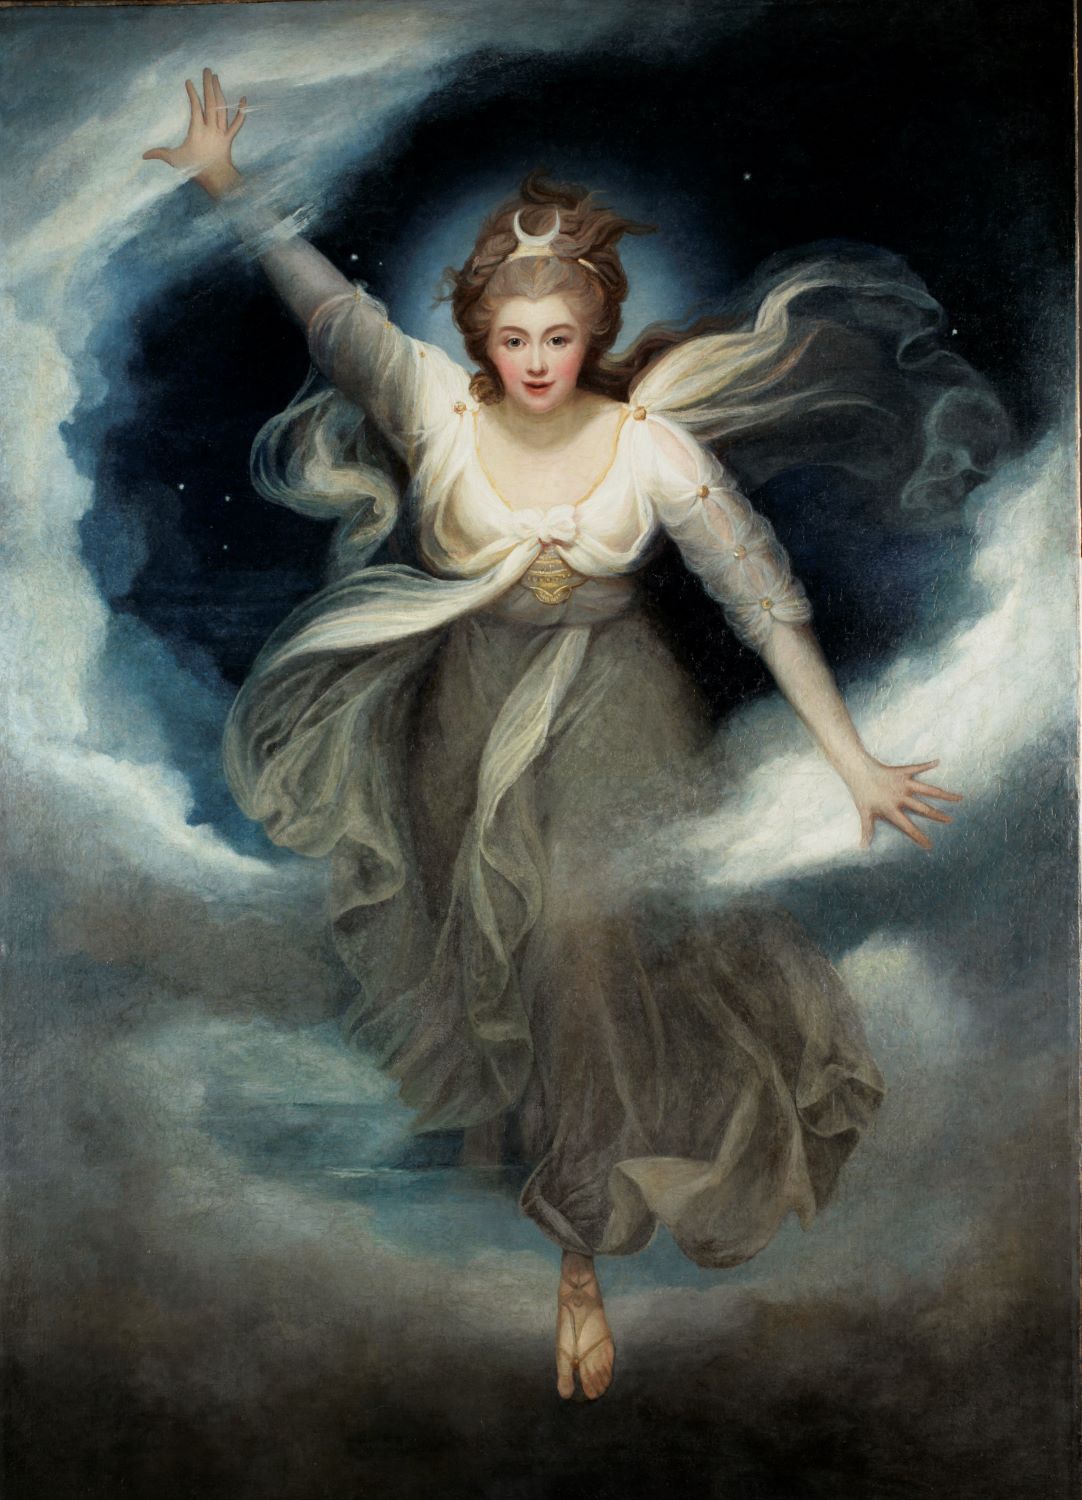 a painting of a woman robed in a white classical costume floating among clouds